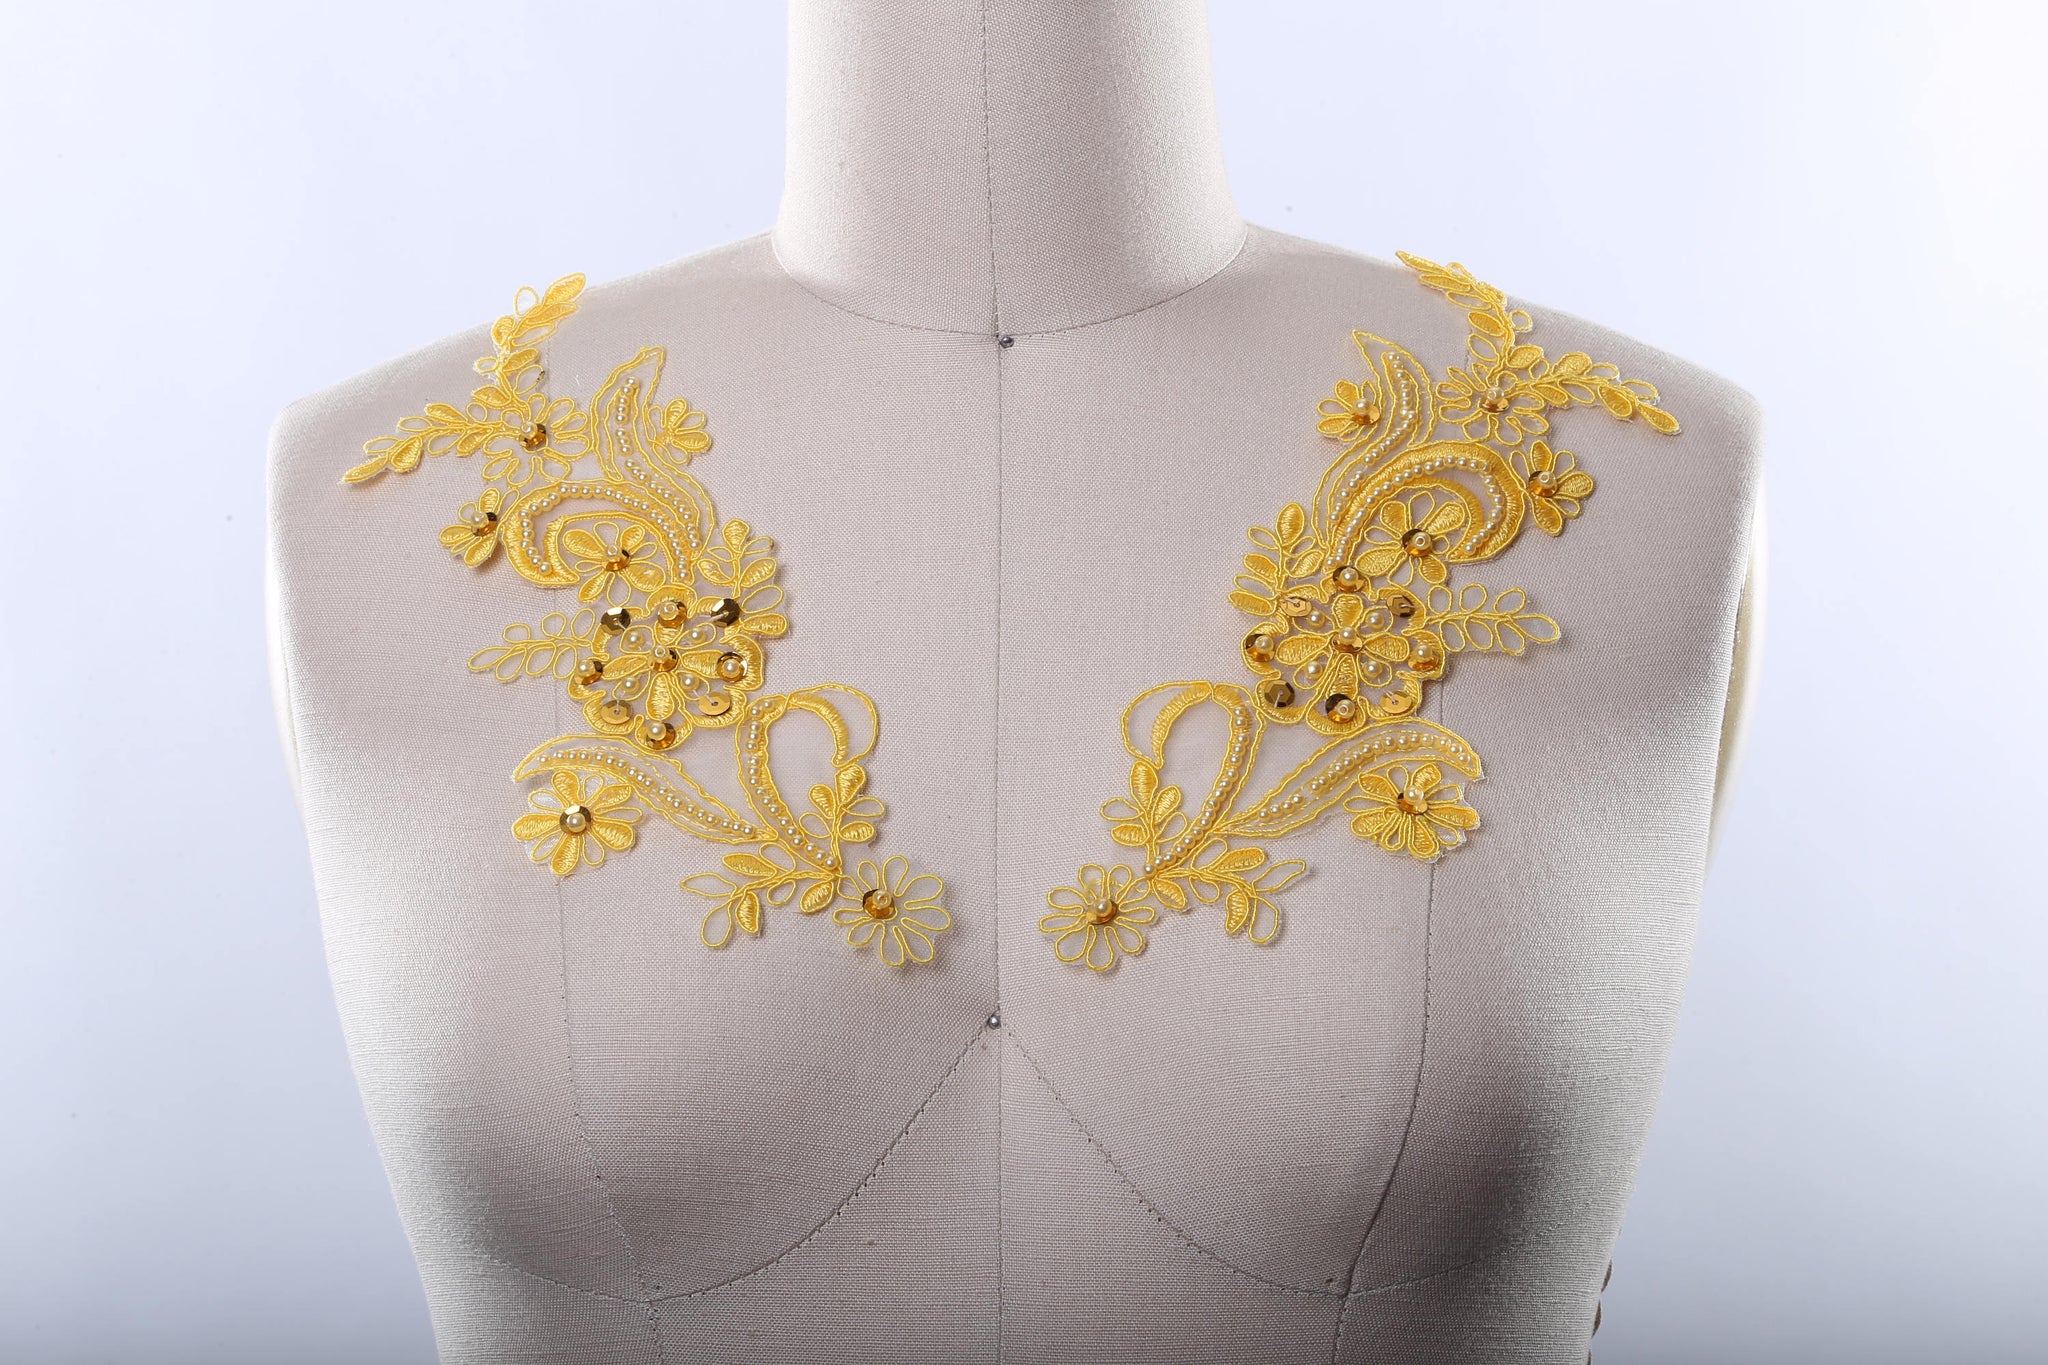 2 Beaded and Lace Yellow Appliques Filled with Pearl-Like Beads